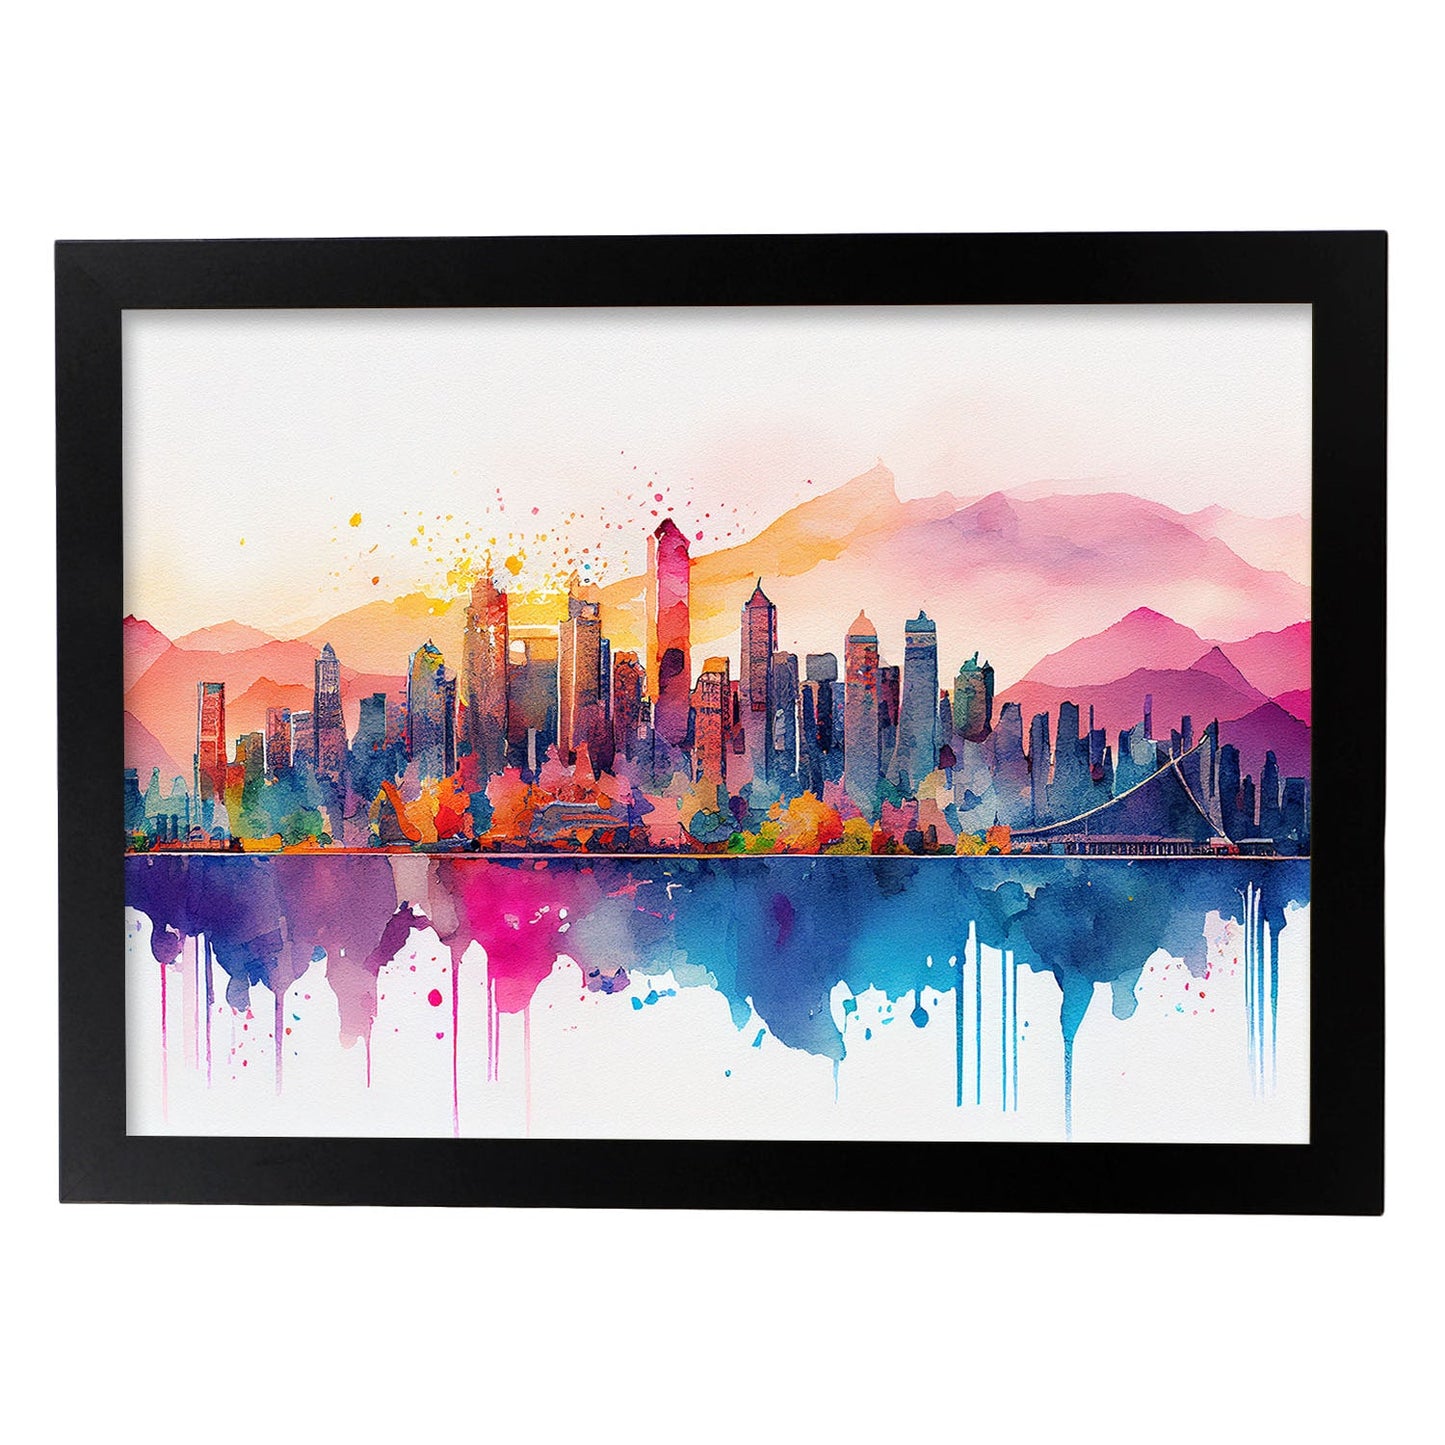 Nacnic watercolor of a skyline of the city of Vancouver. Aesthetic Wall Art Prints for Bedroom or Living Room Design.